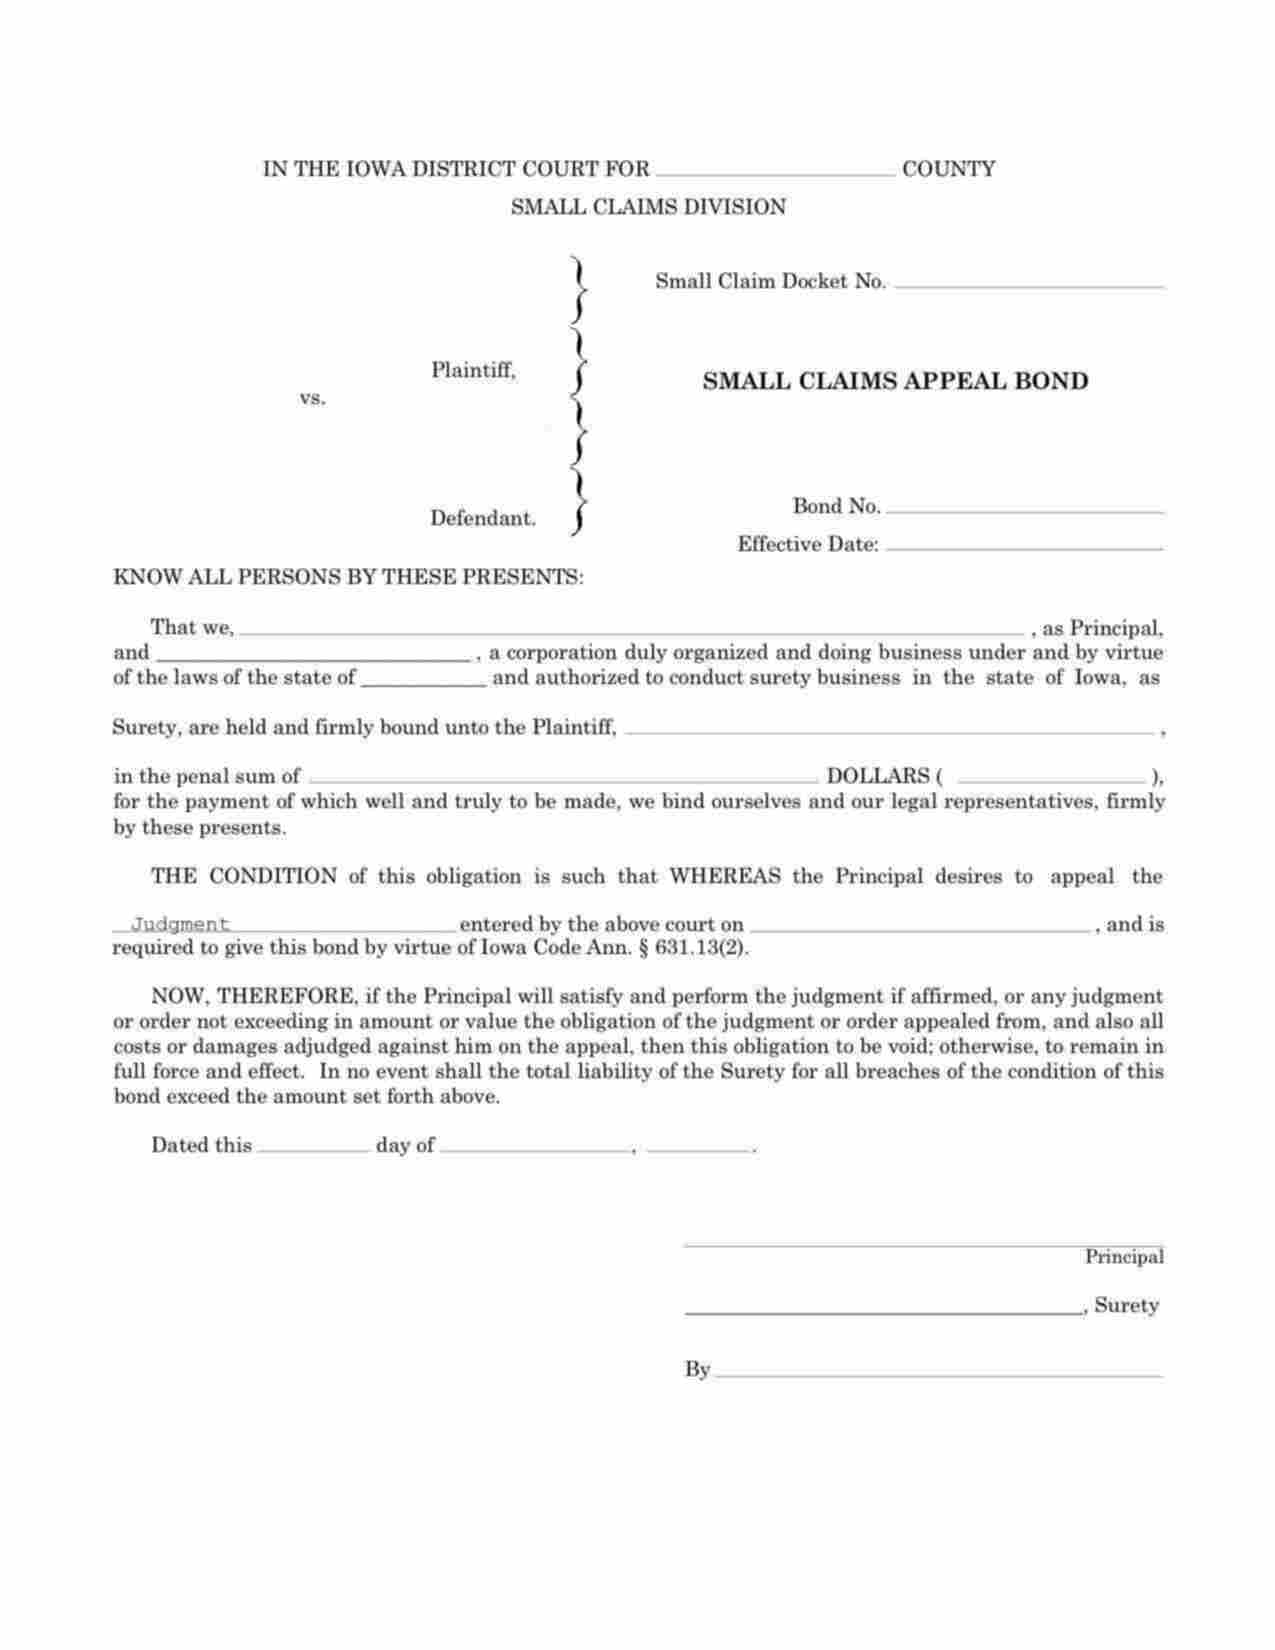 Iowa Small Claims Appeal Bond Form